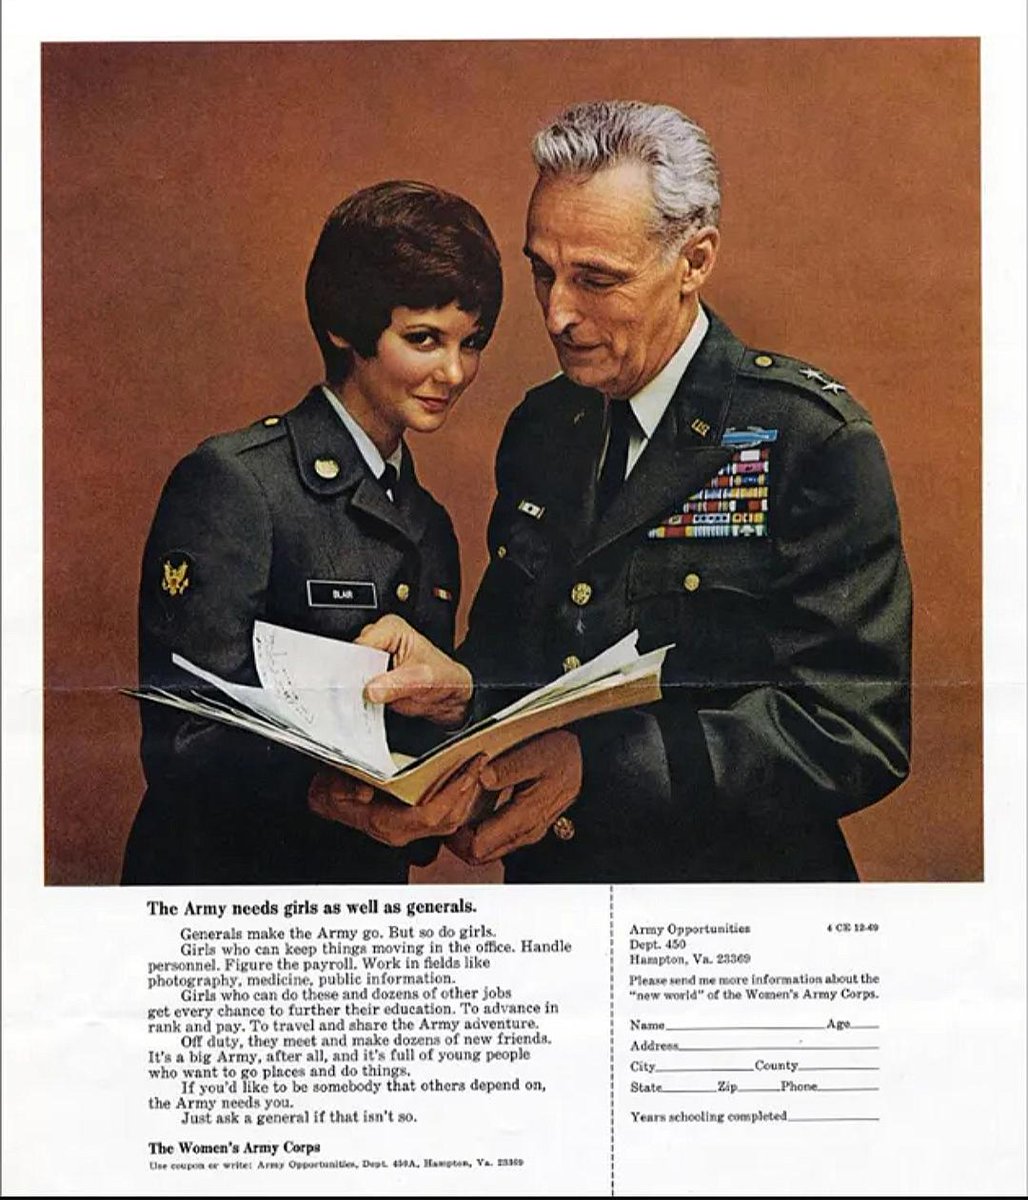 The Army needs girls as well as generals.